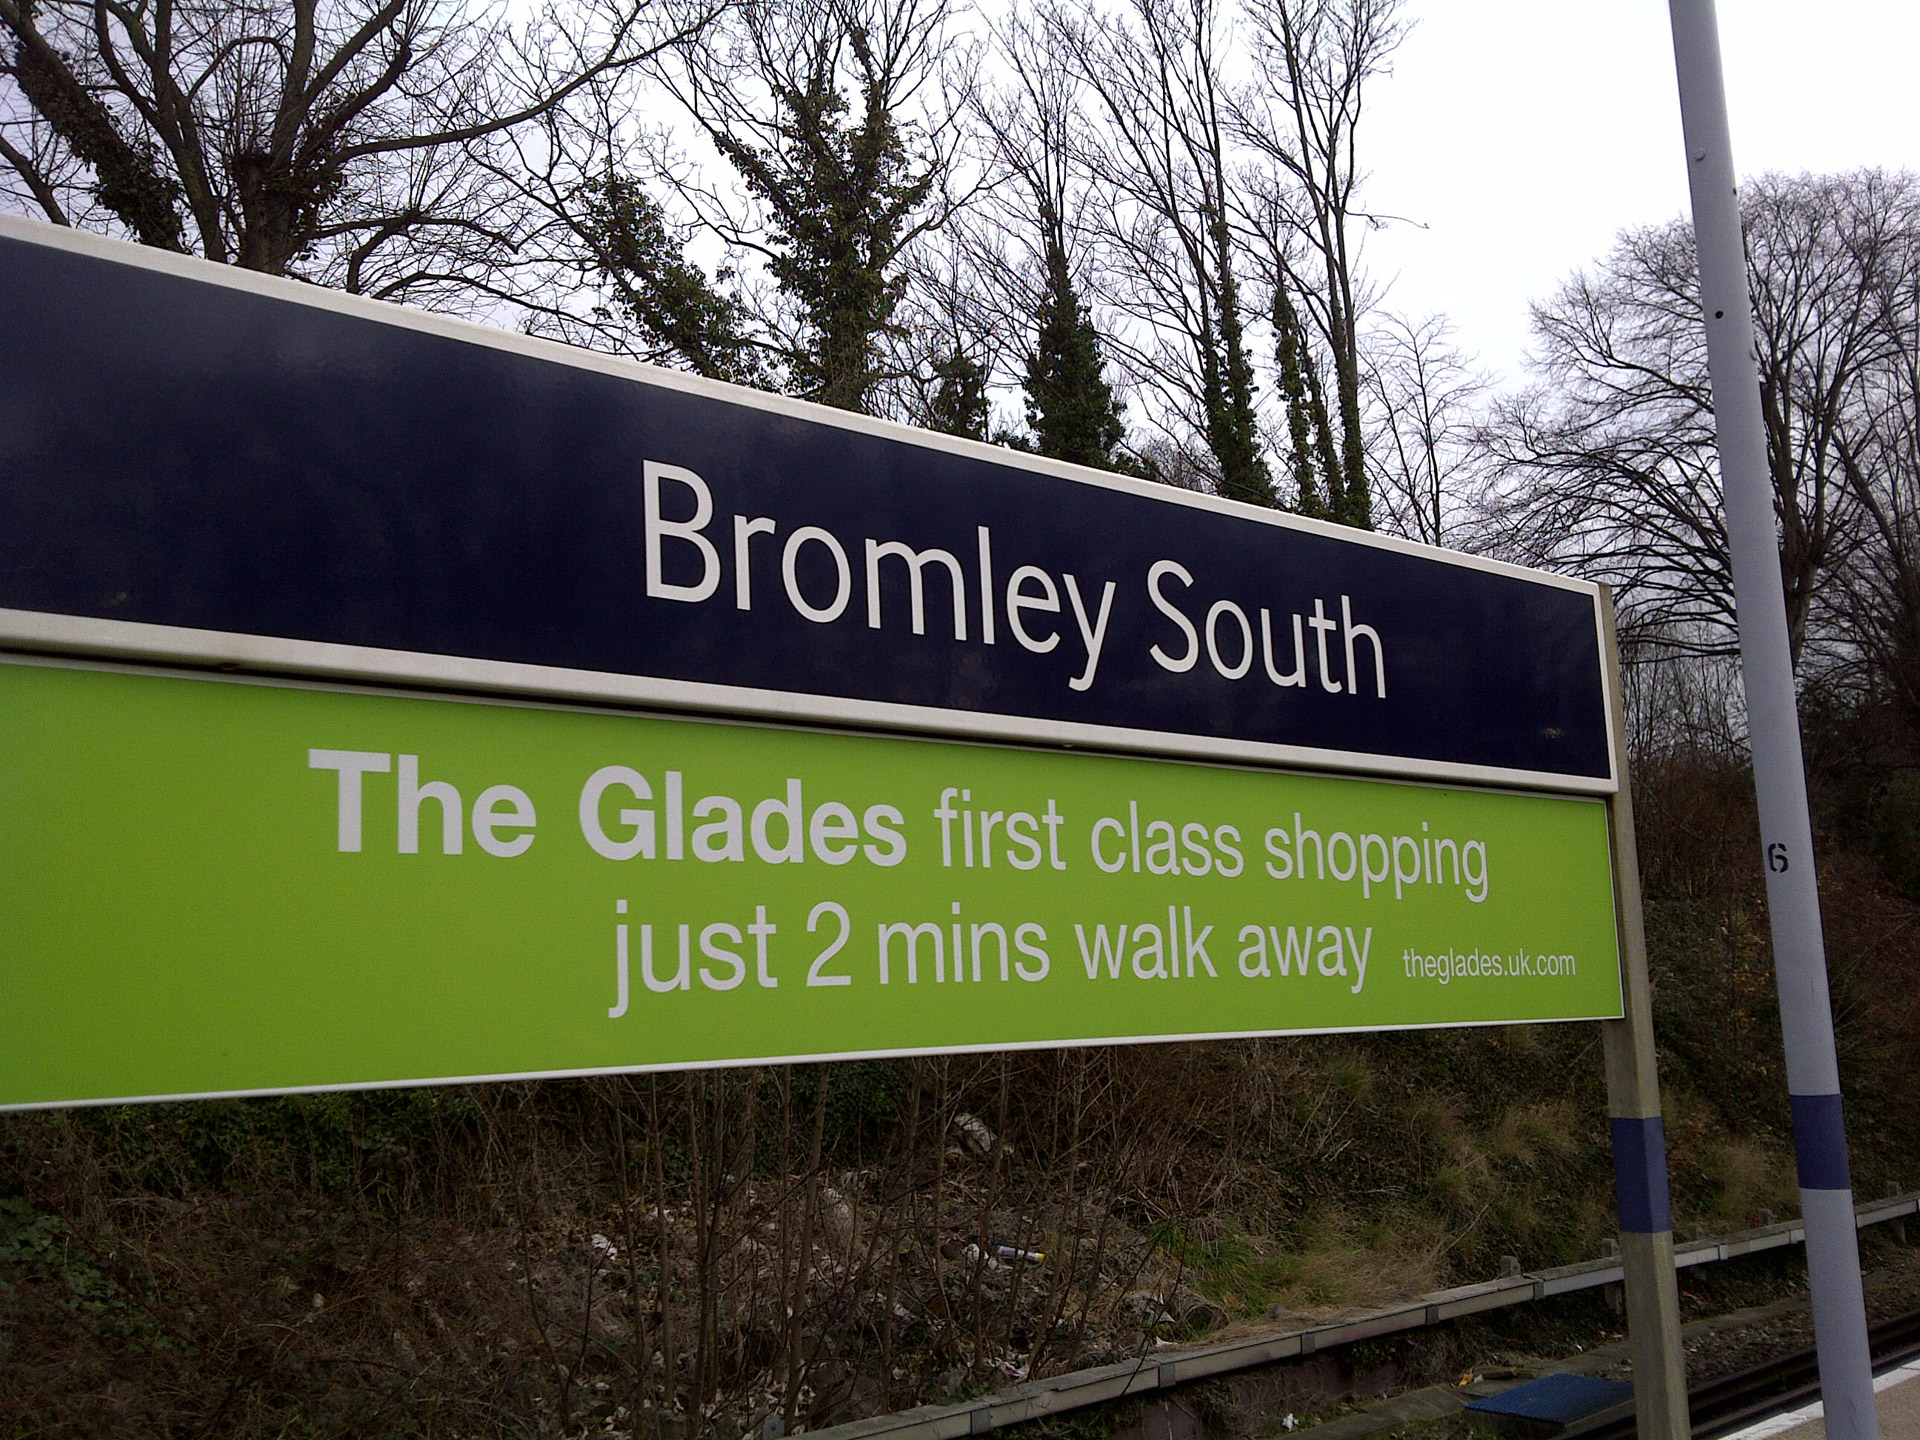 bromley-south-platform-sign-free-stock-photo-public-domain-pictures